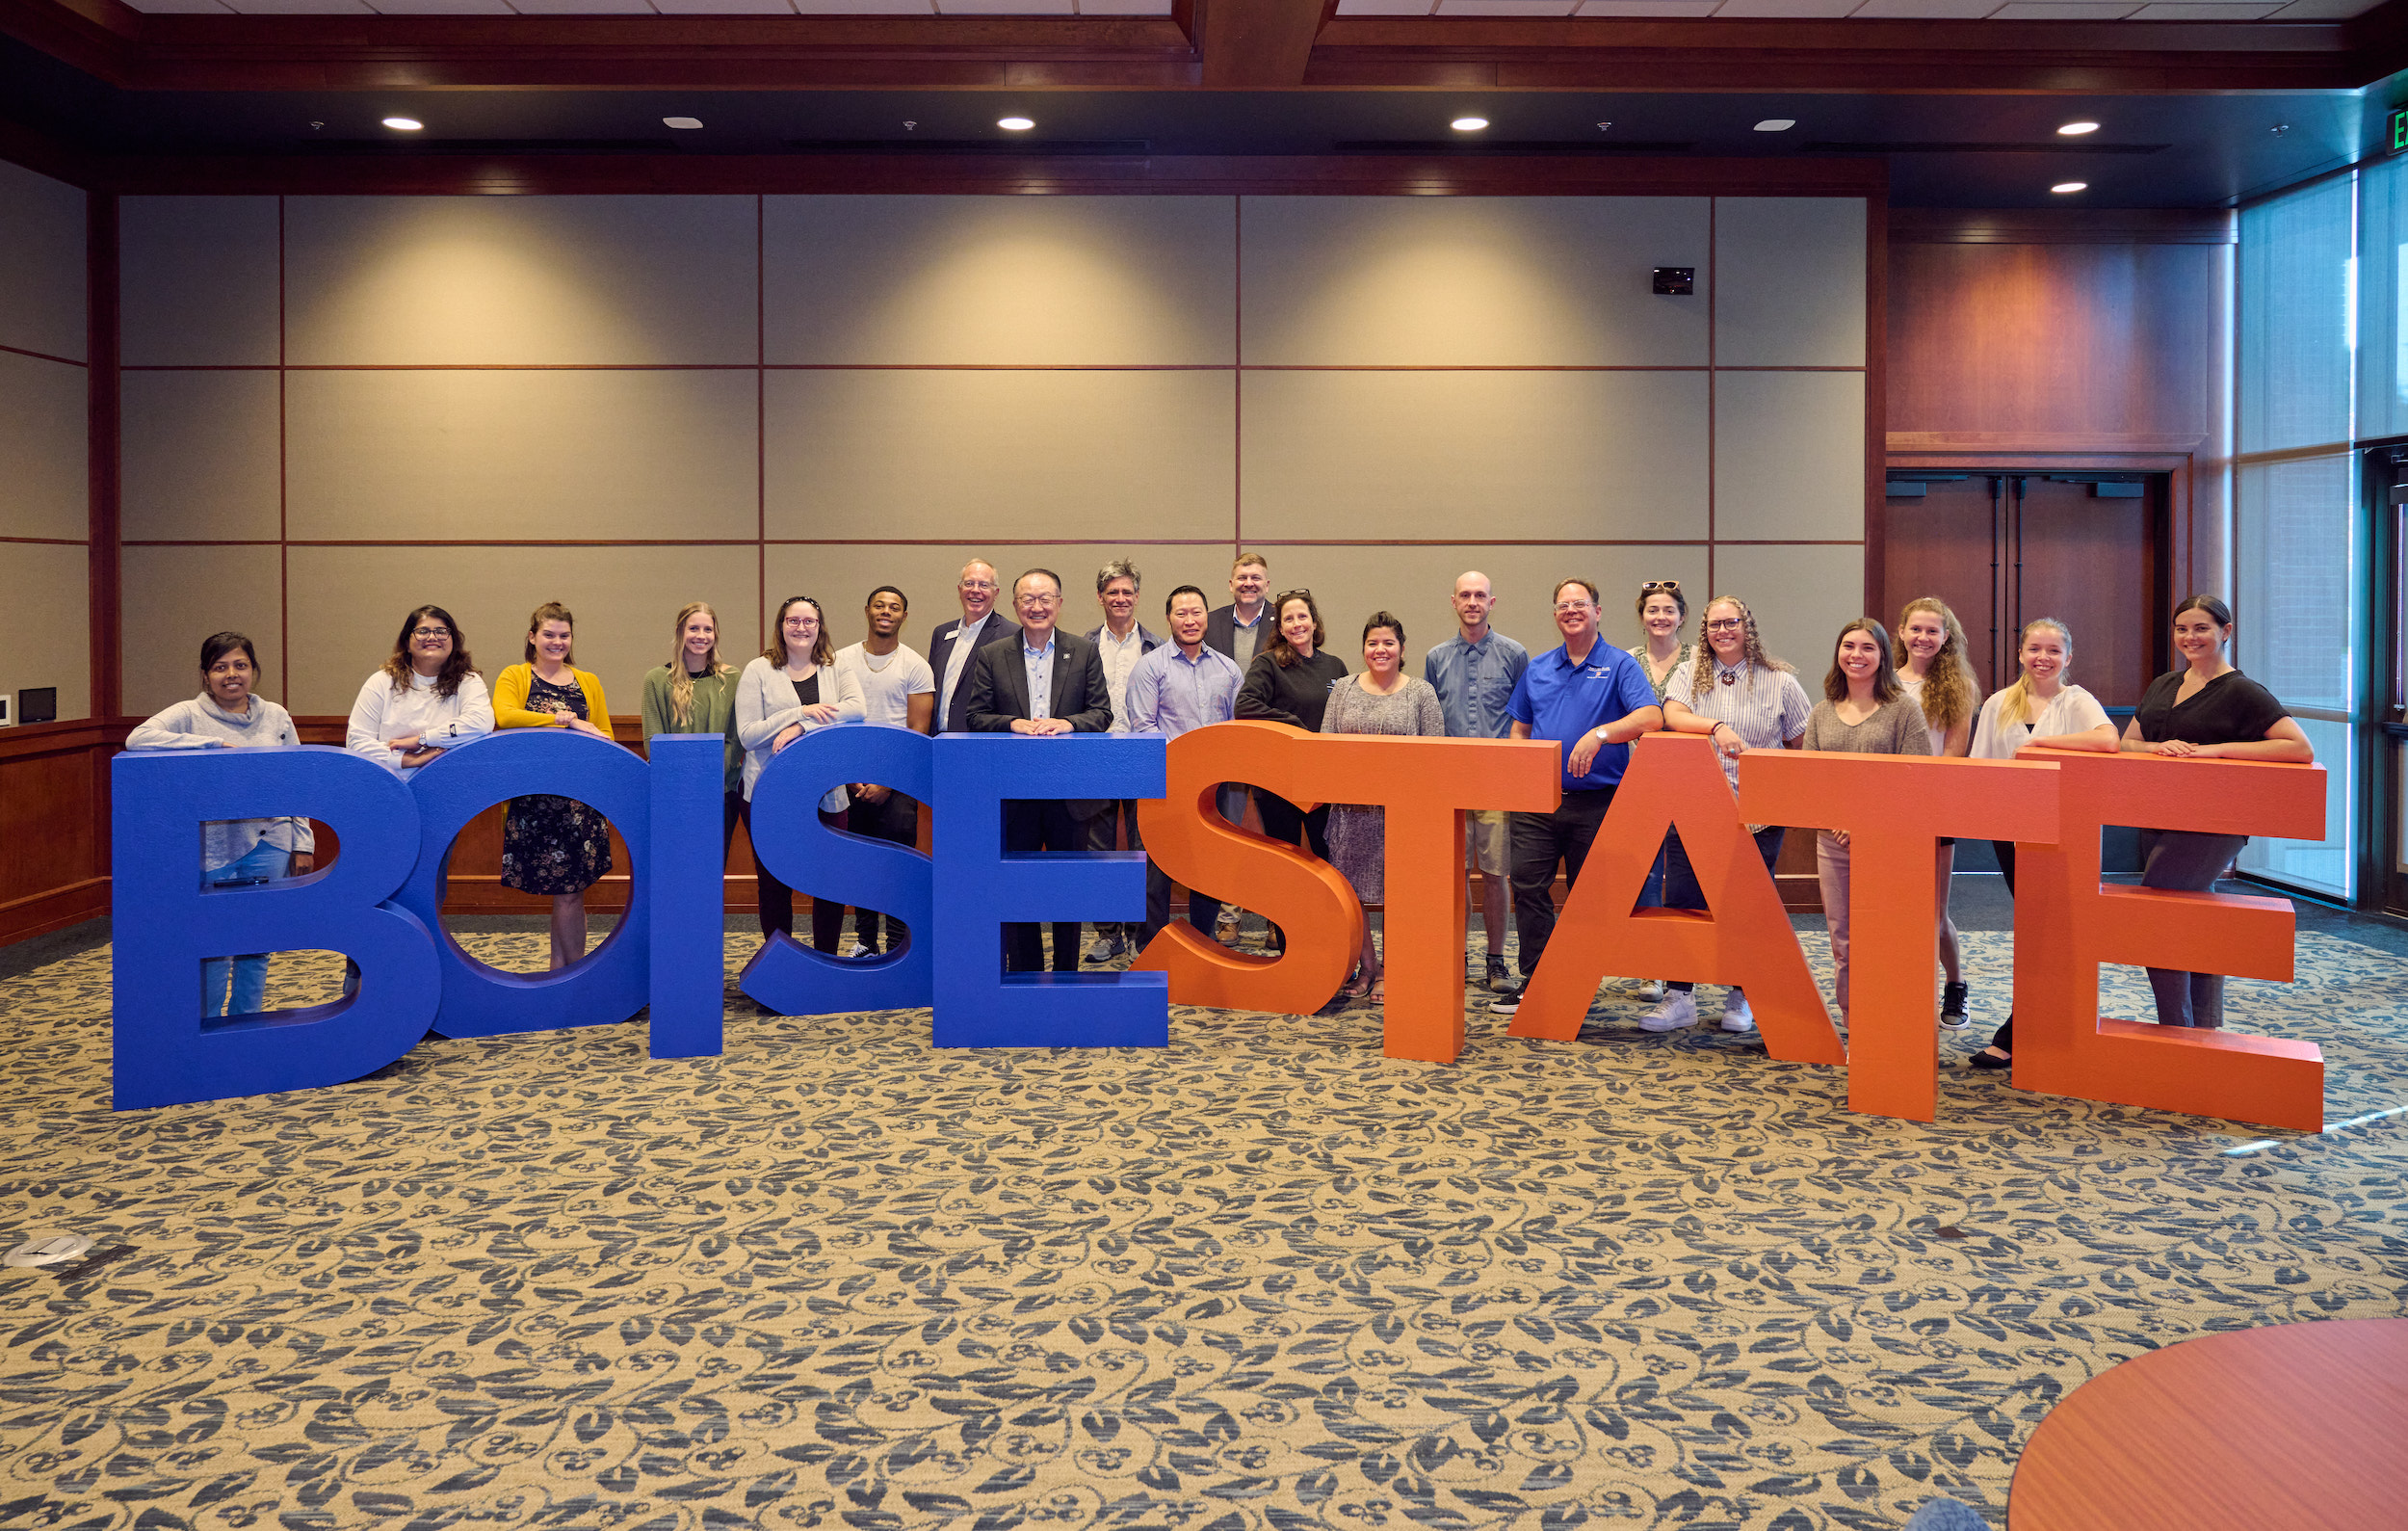 SPPH group photo with prop letters spelling Boise State